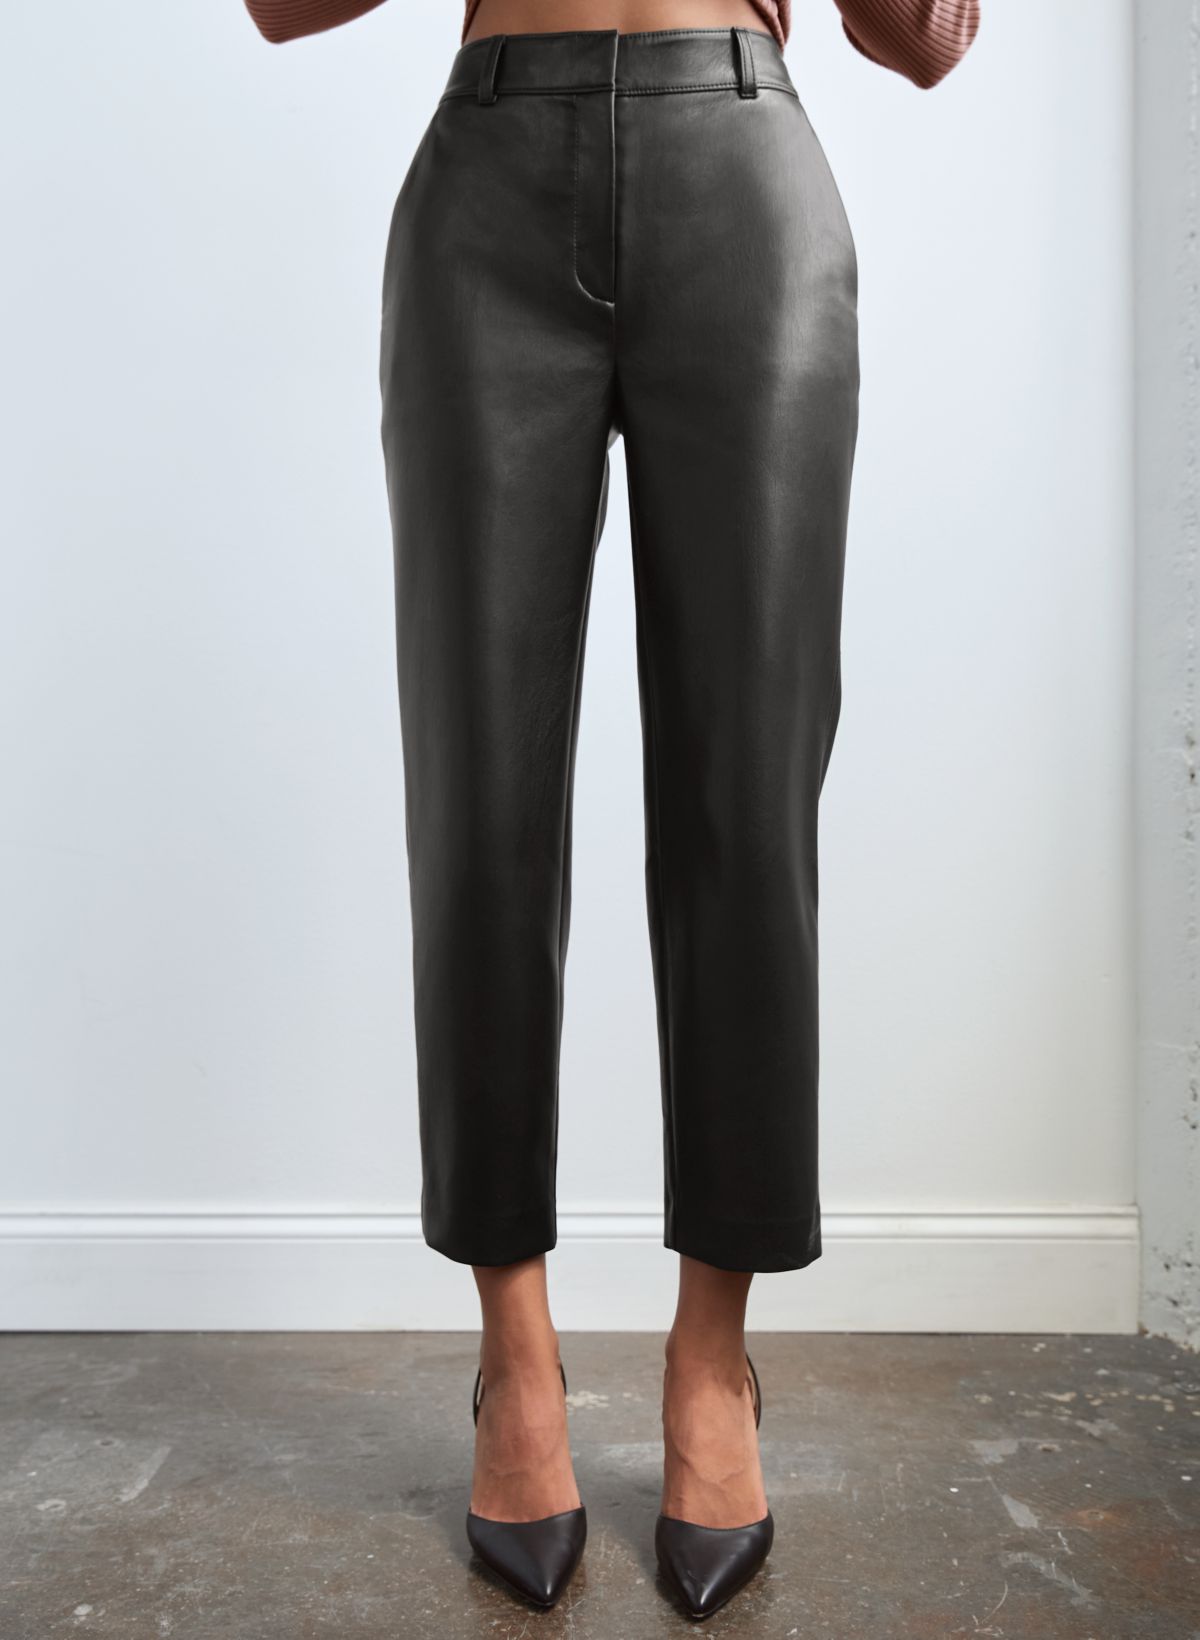 ARITZIA MELINA PANT DUPES  Only $65 and they look the SAME! 